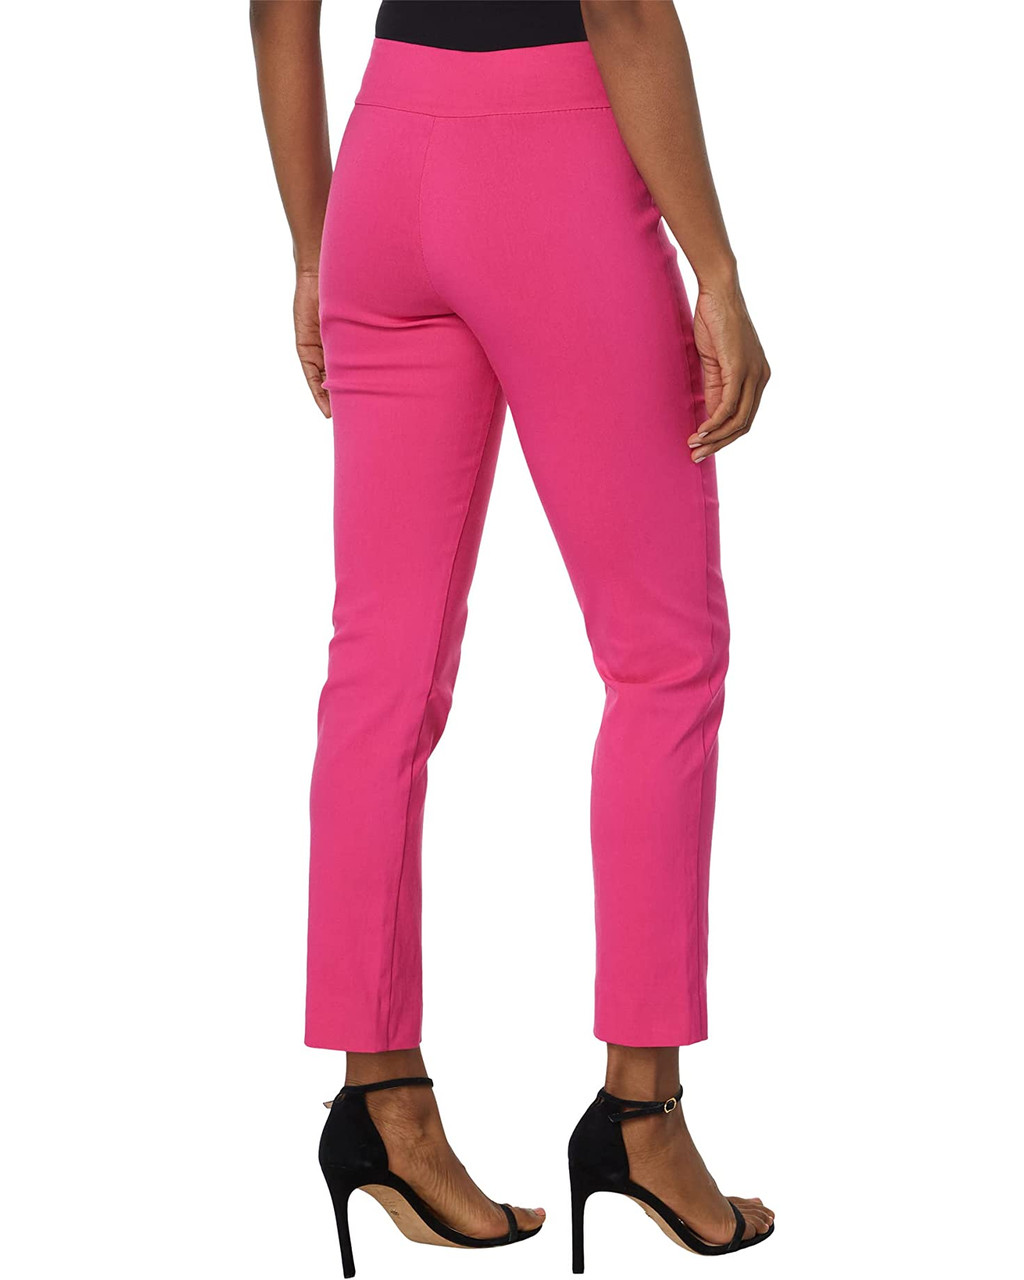 Buy Pink Ankle Length Pant Cotton Samray for Best Price, Reviews